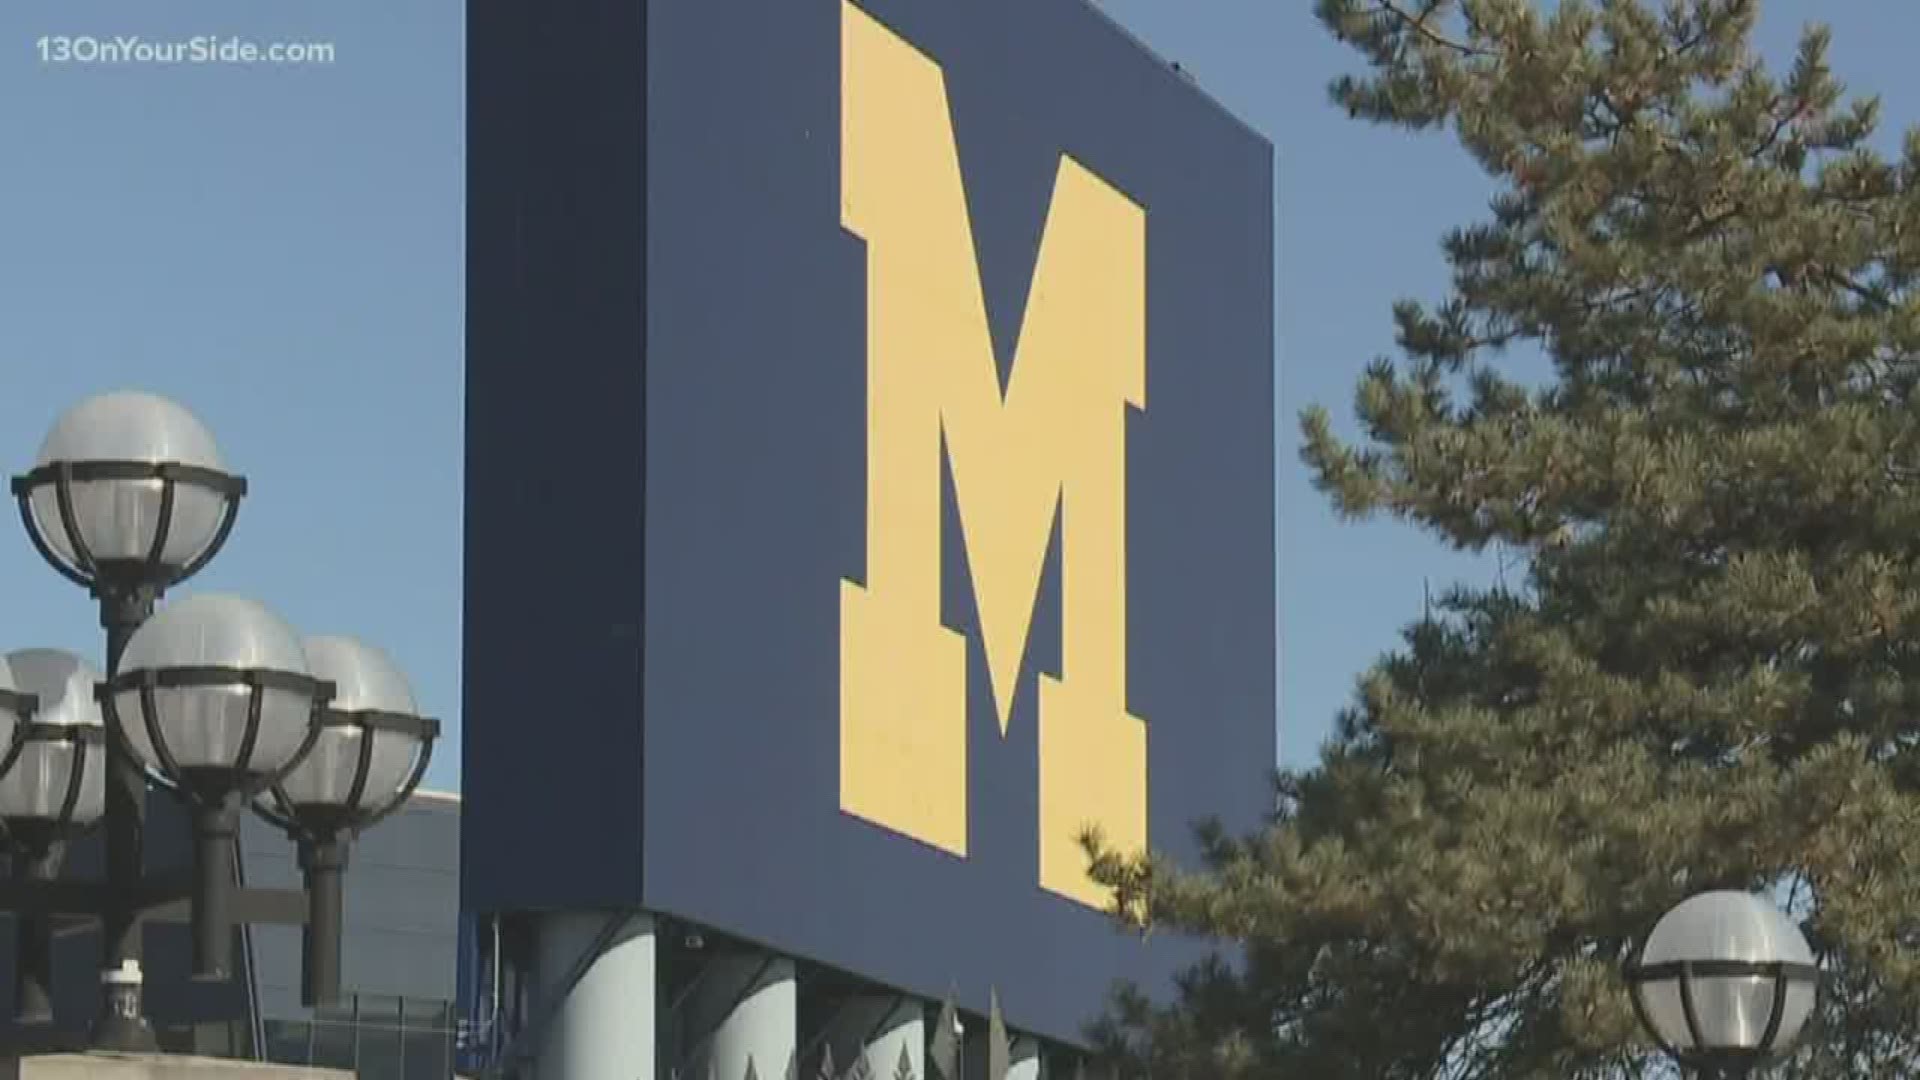 An Olympic wrestler is accusing a University of Michigan doctor of touching him inappropriately during medical exams at the school.